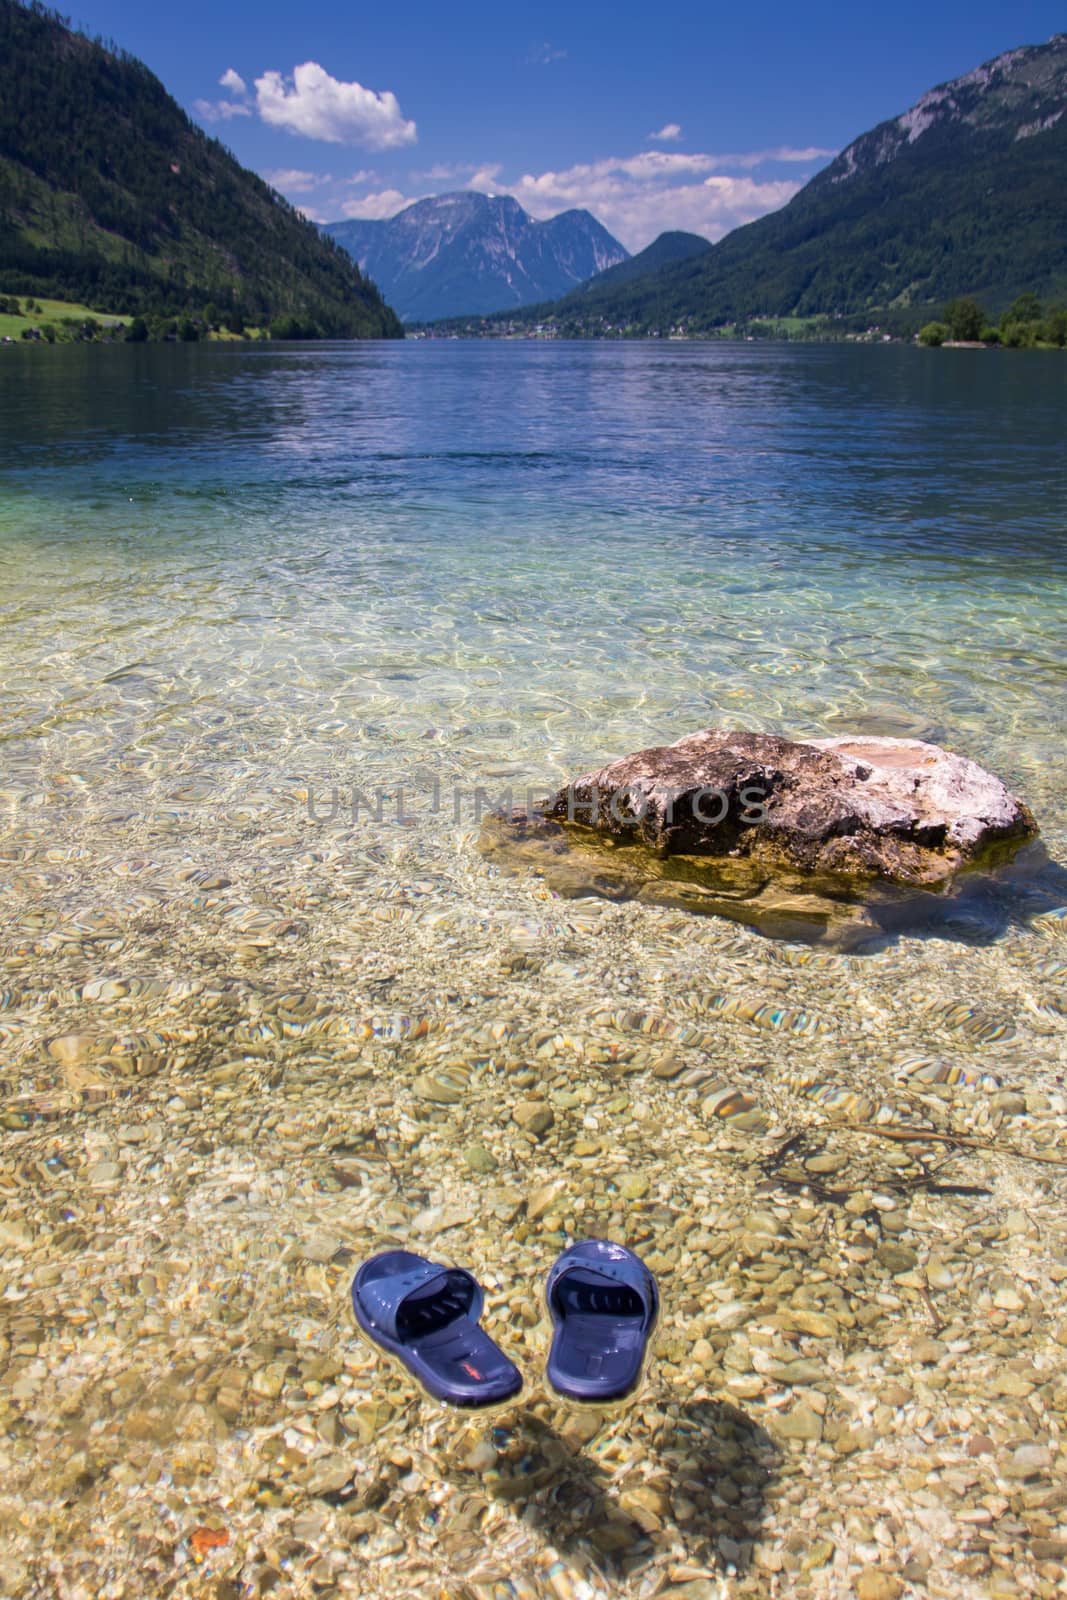 Slippers on the surface of the lake